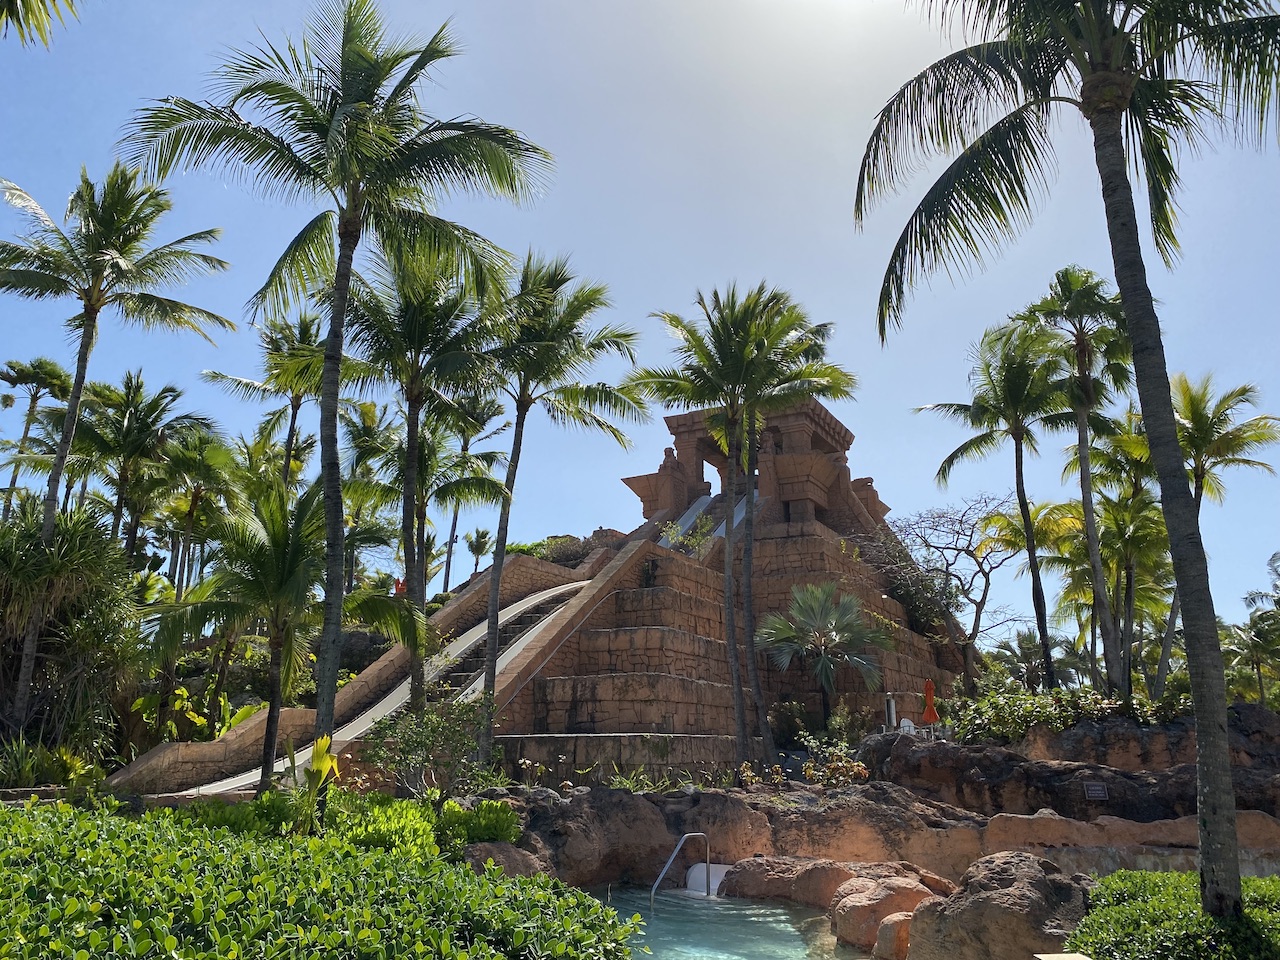 Throughout the Atlantis Bahamas resort you can spot dreamy architecture